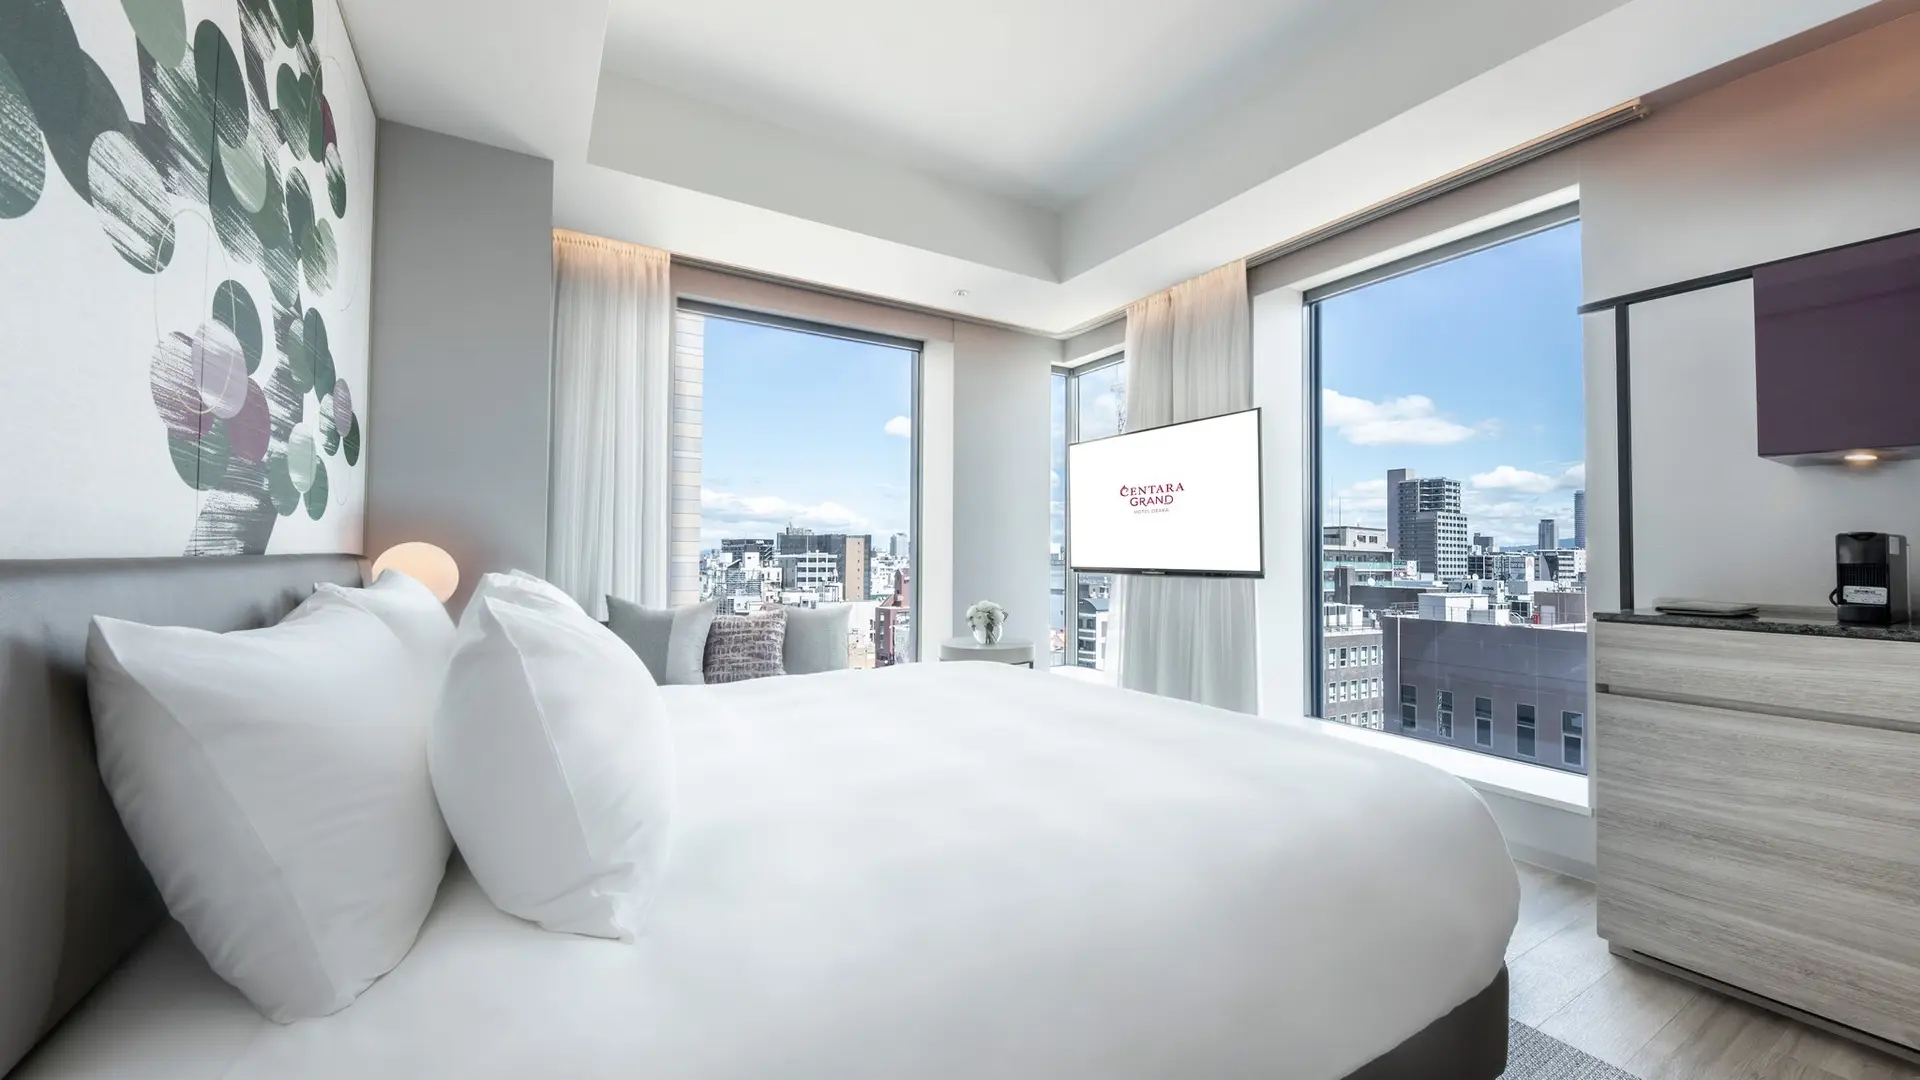 White hotel room with kingsize bed, tv, white modern painting and view to the city.